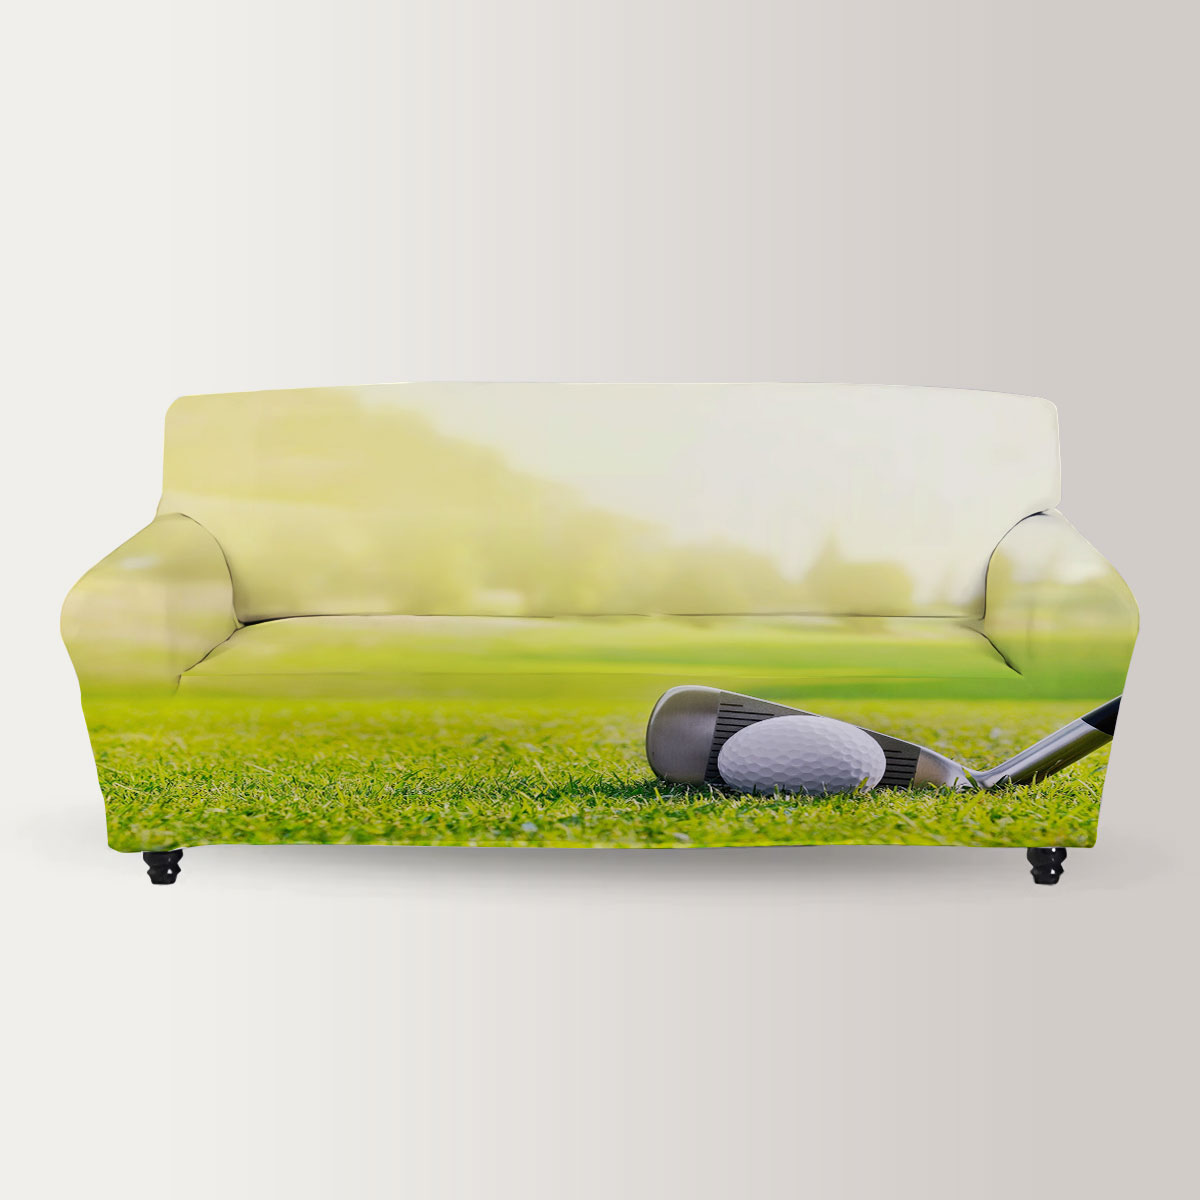 Golf Tools On Grass Sofa Cover_2_1